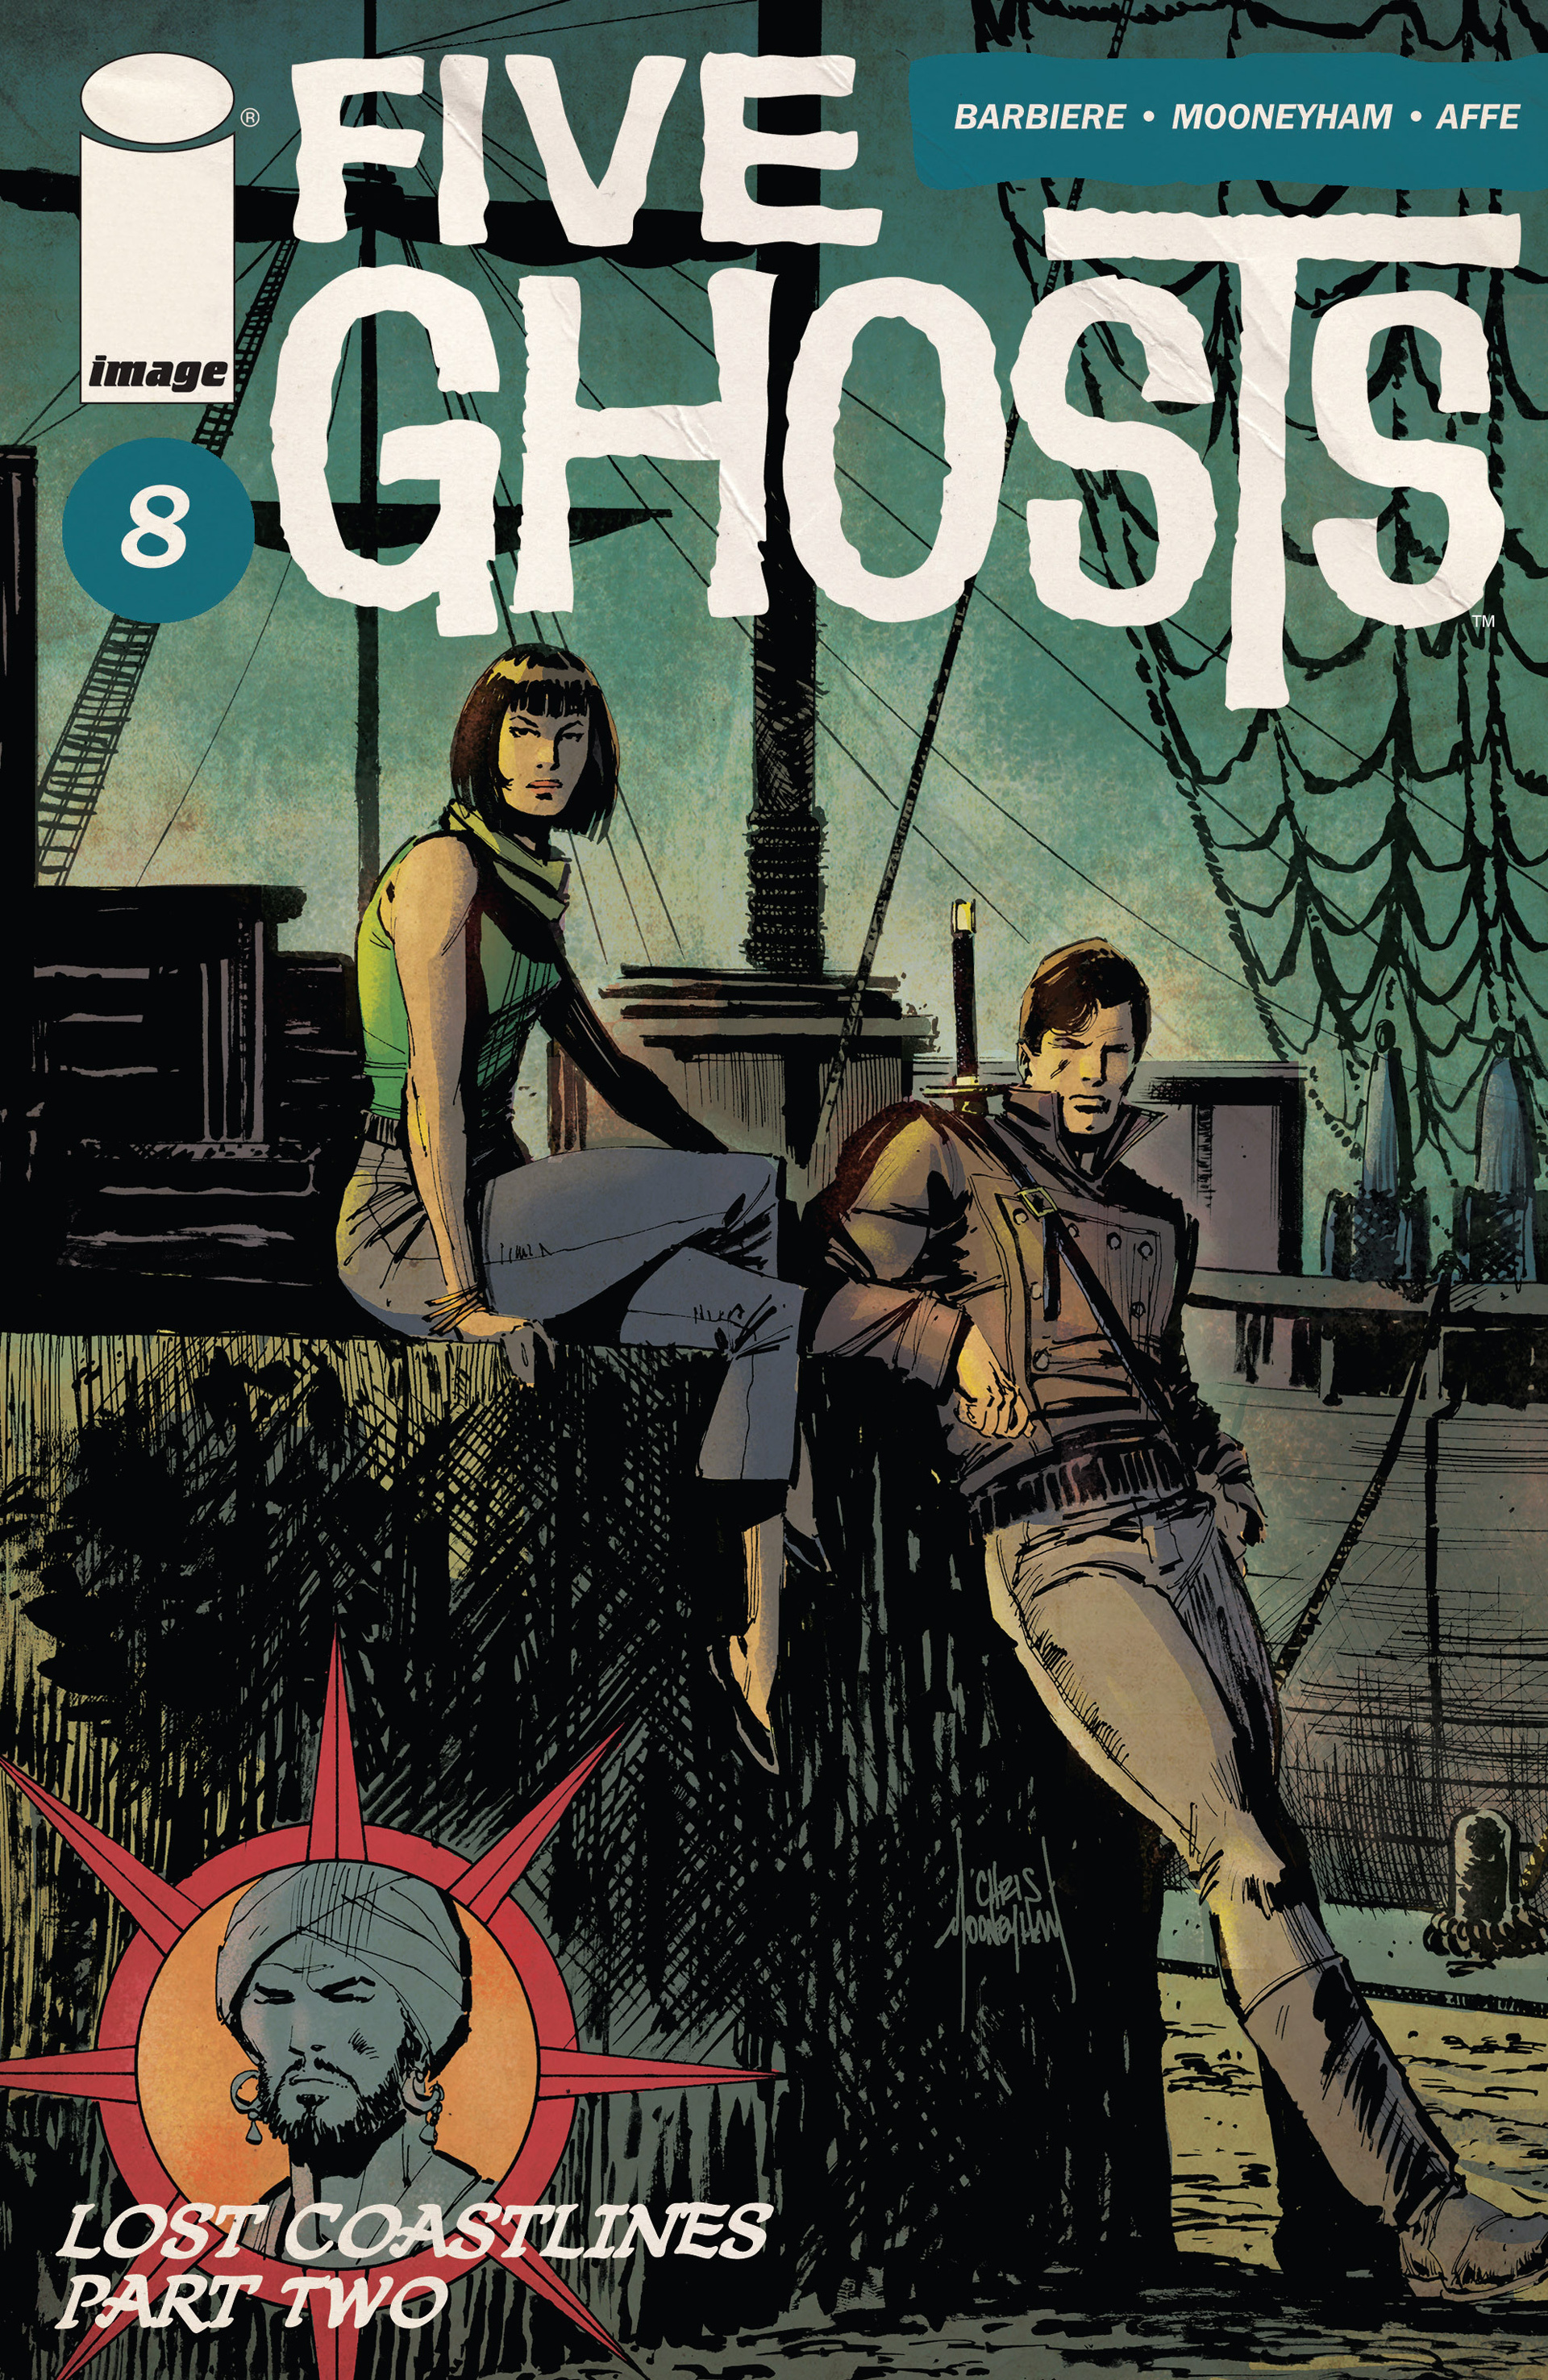 Read online Five Ghosts comic -  Issue #8 - 1